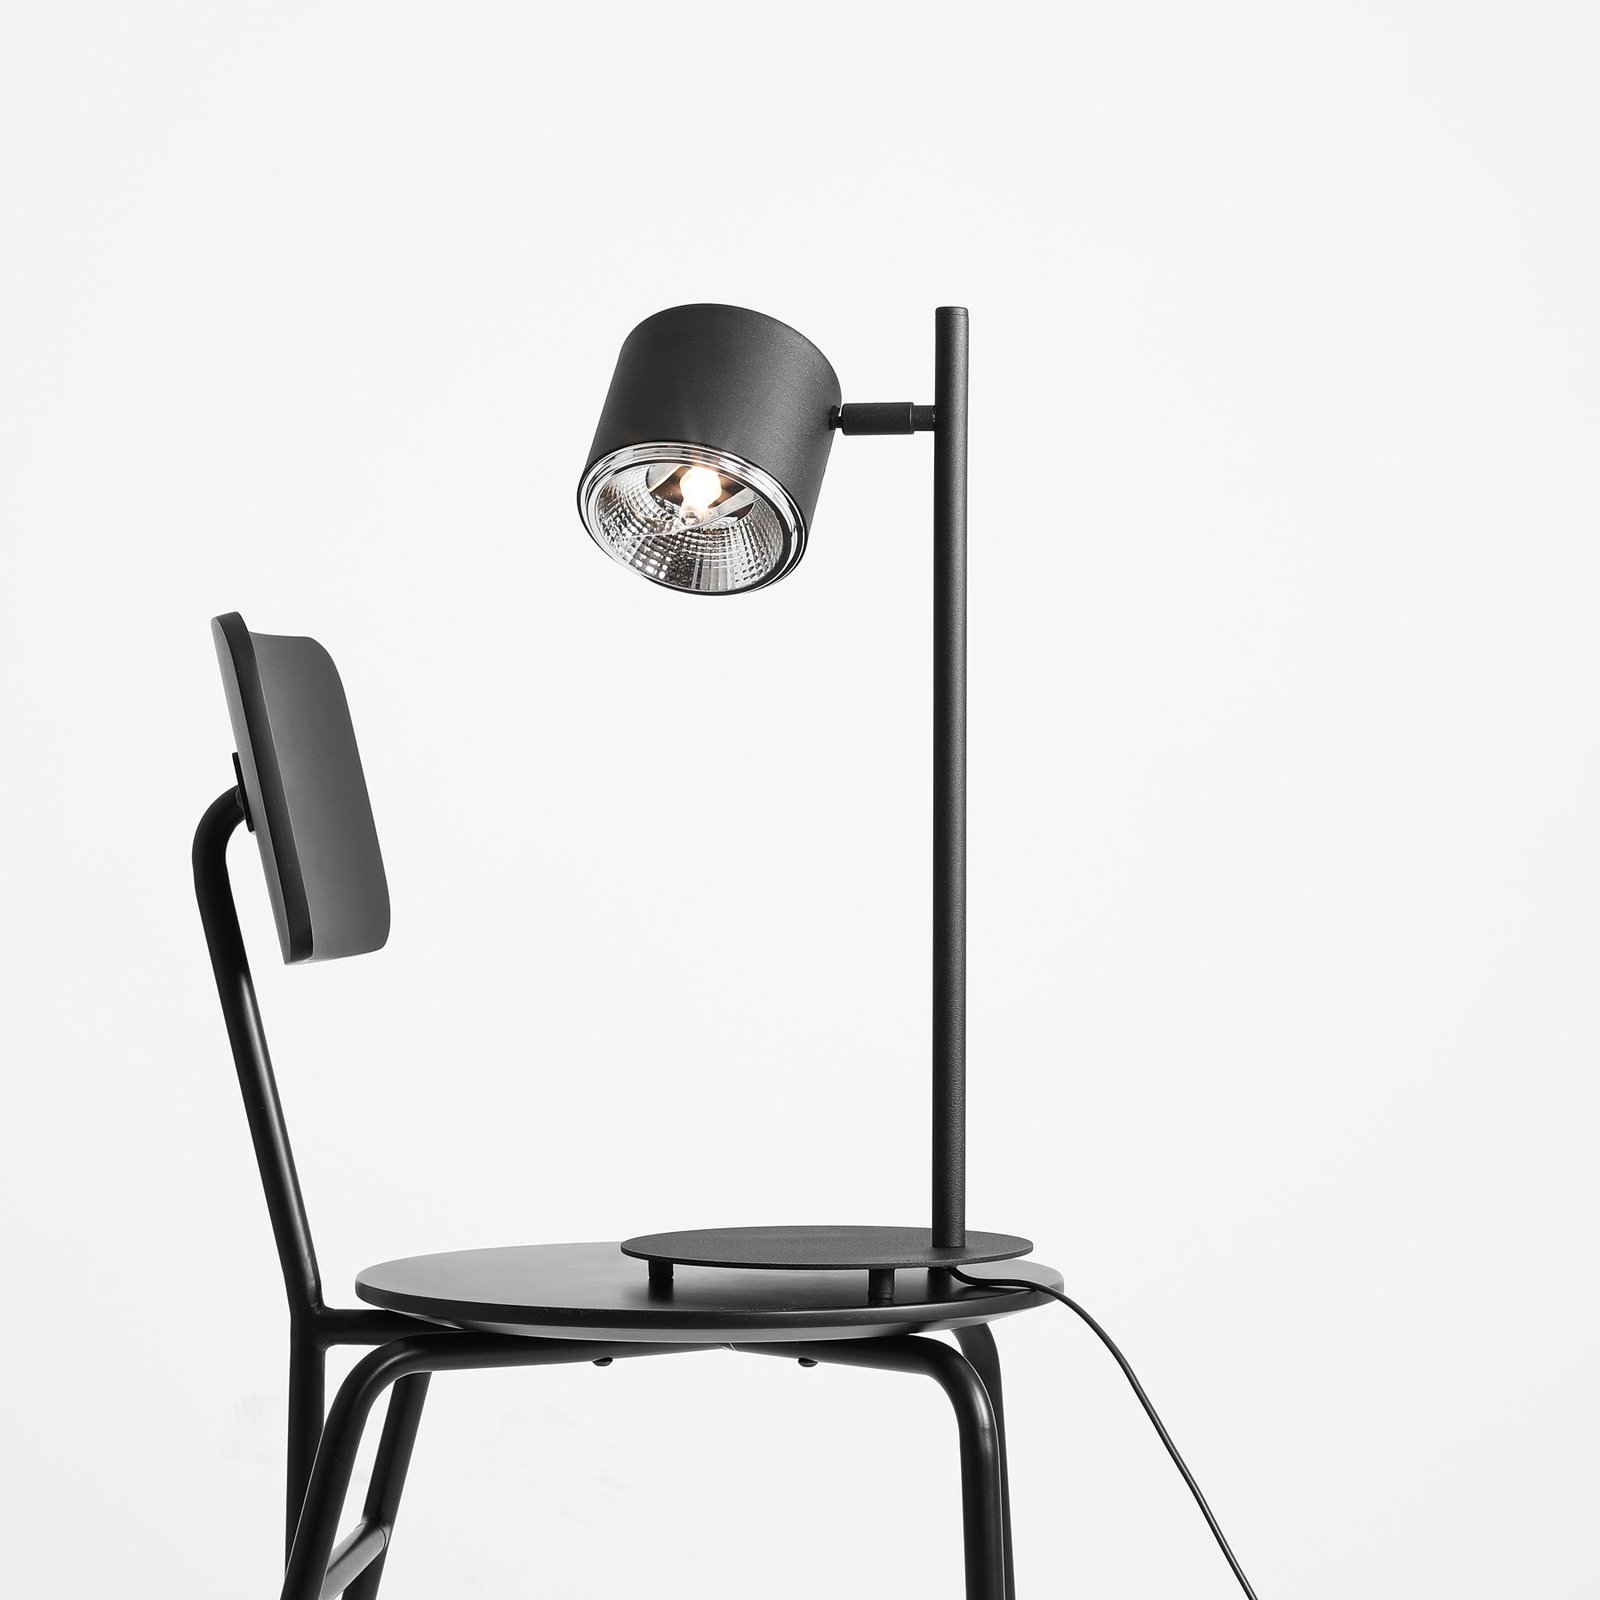 Bot table lamp, black movable head